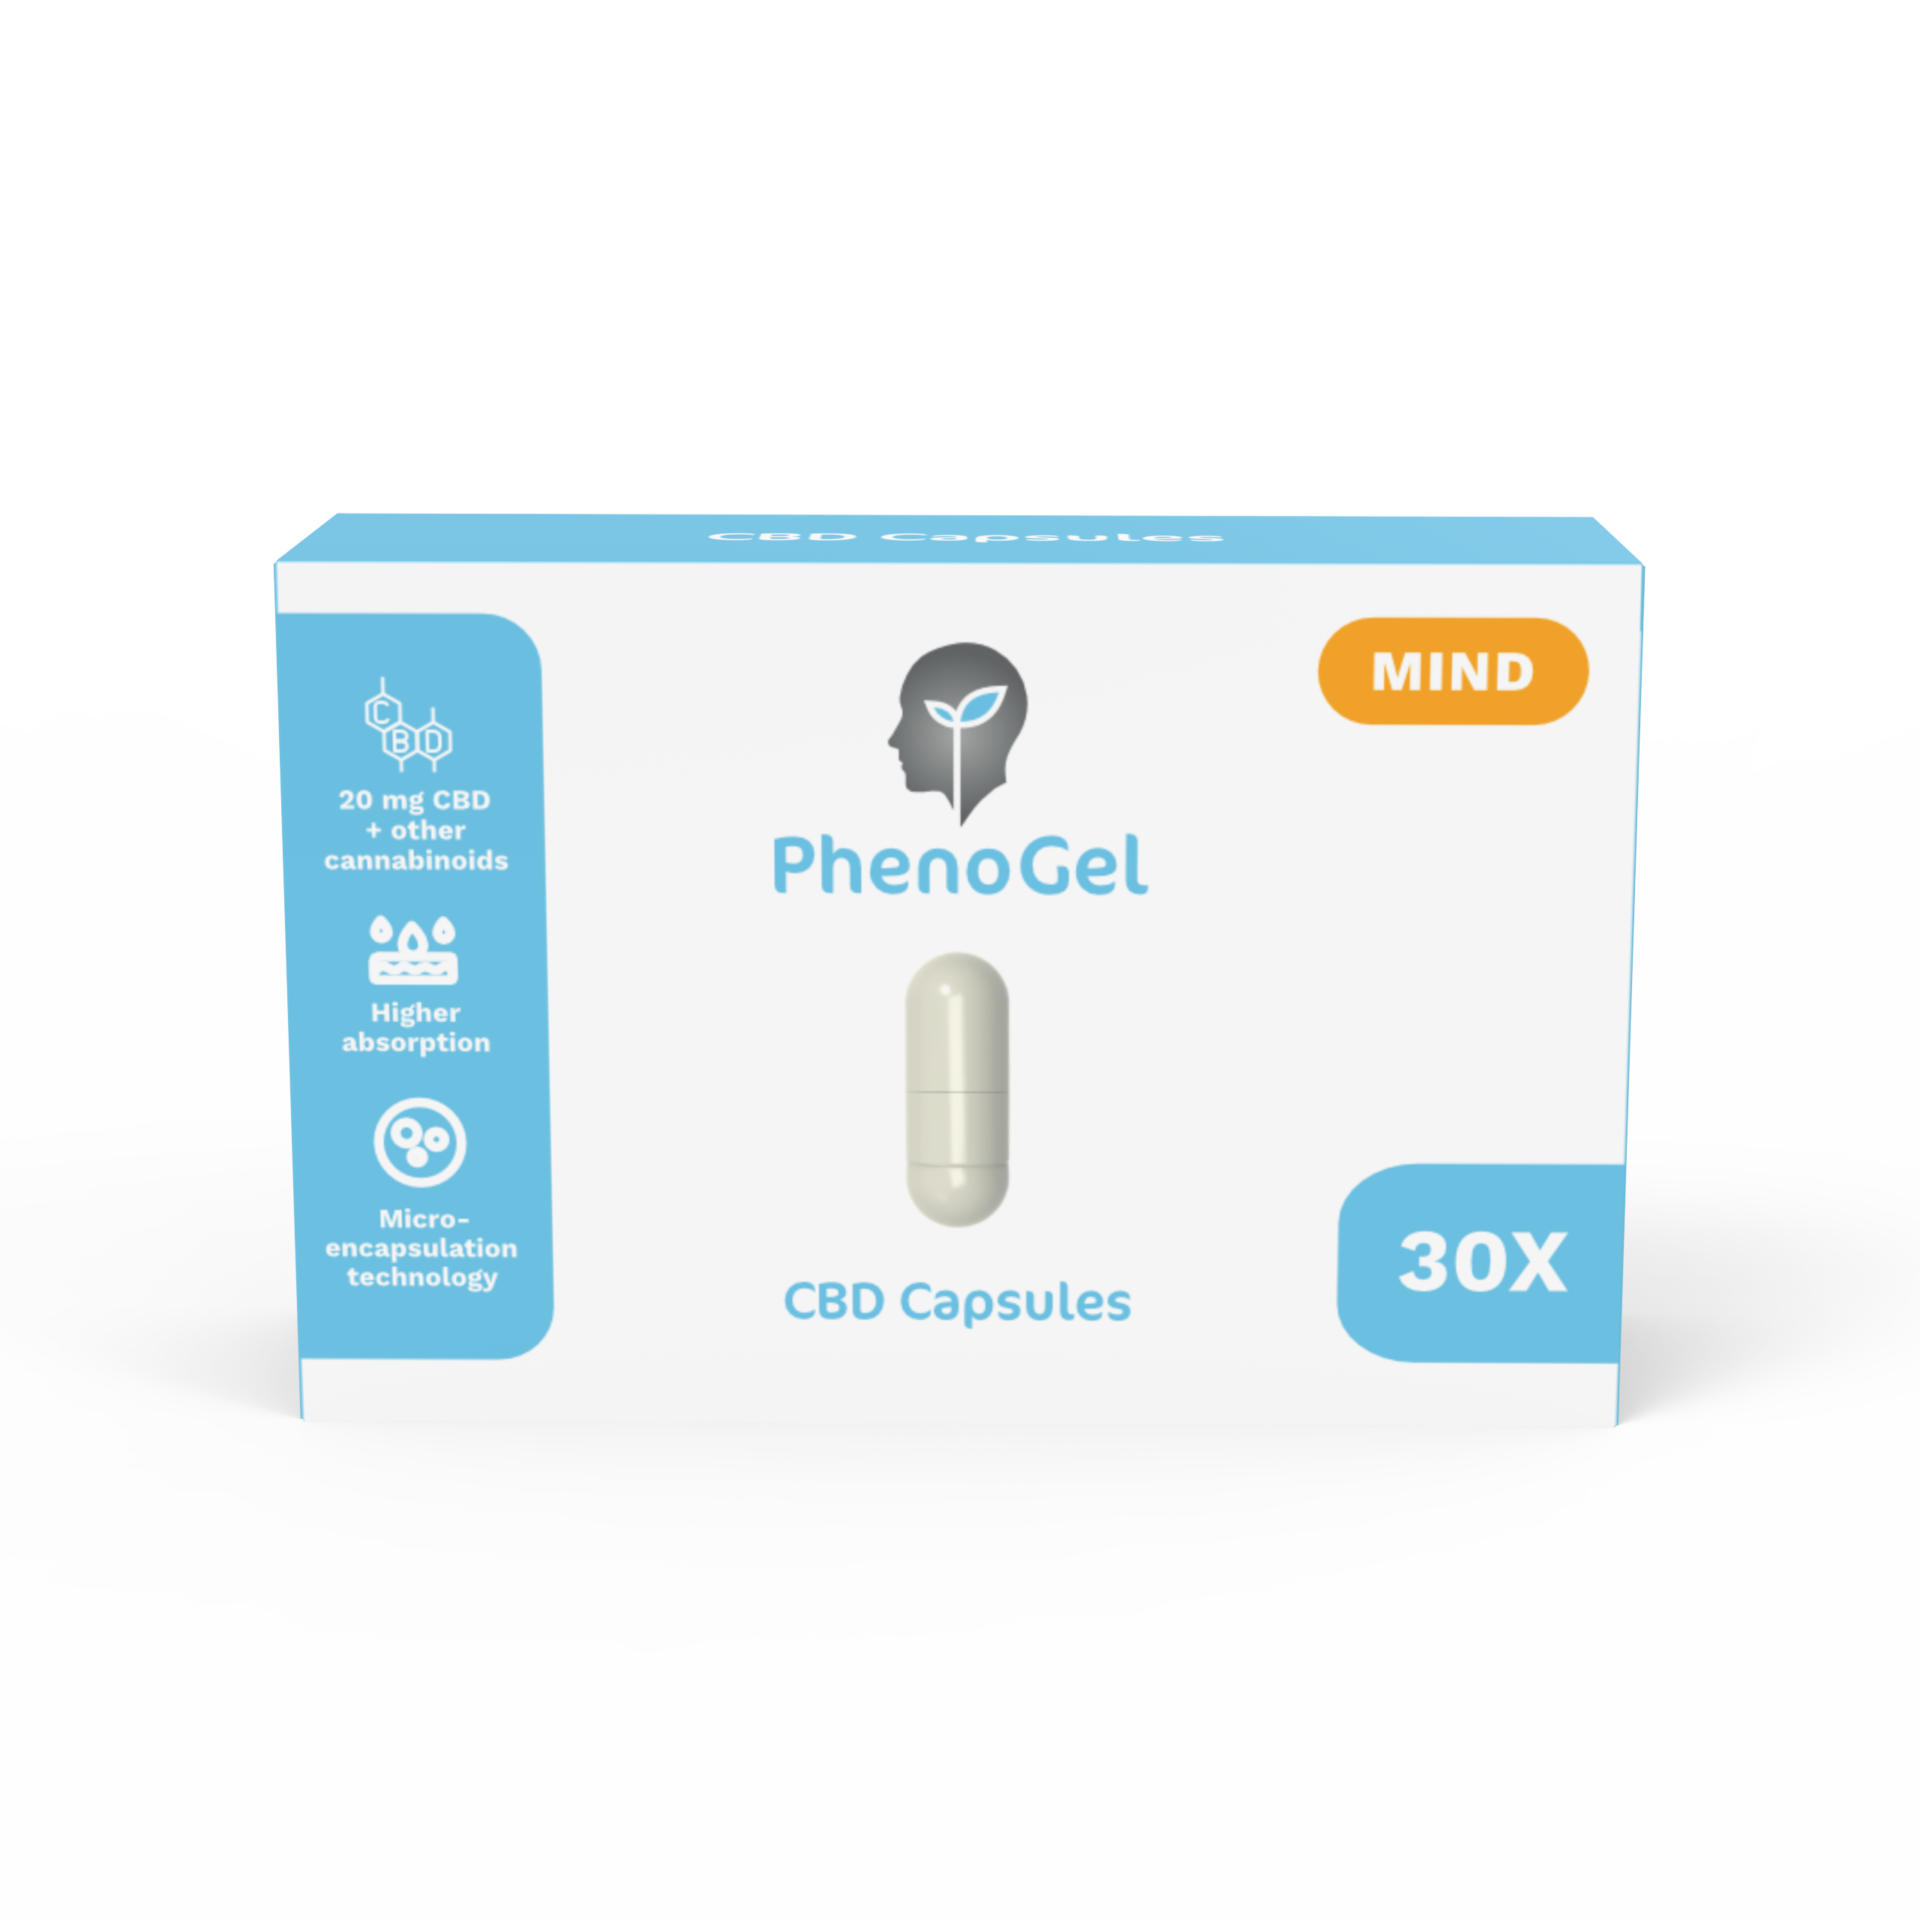 Phenogel CBD Capsules for Natural Well-being